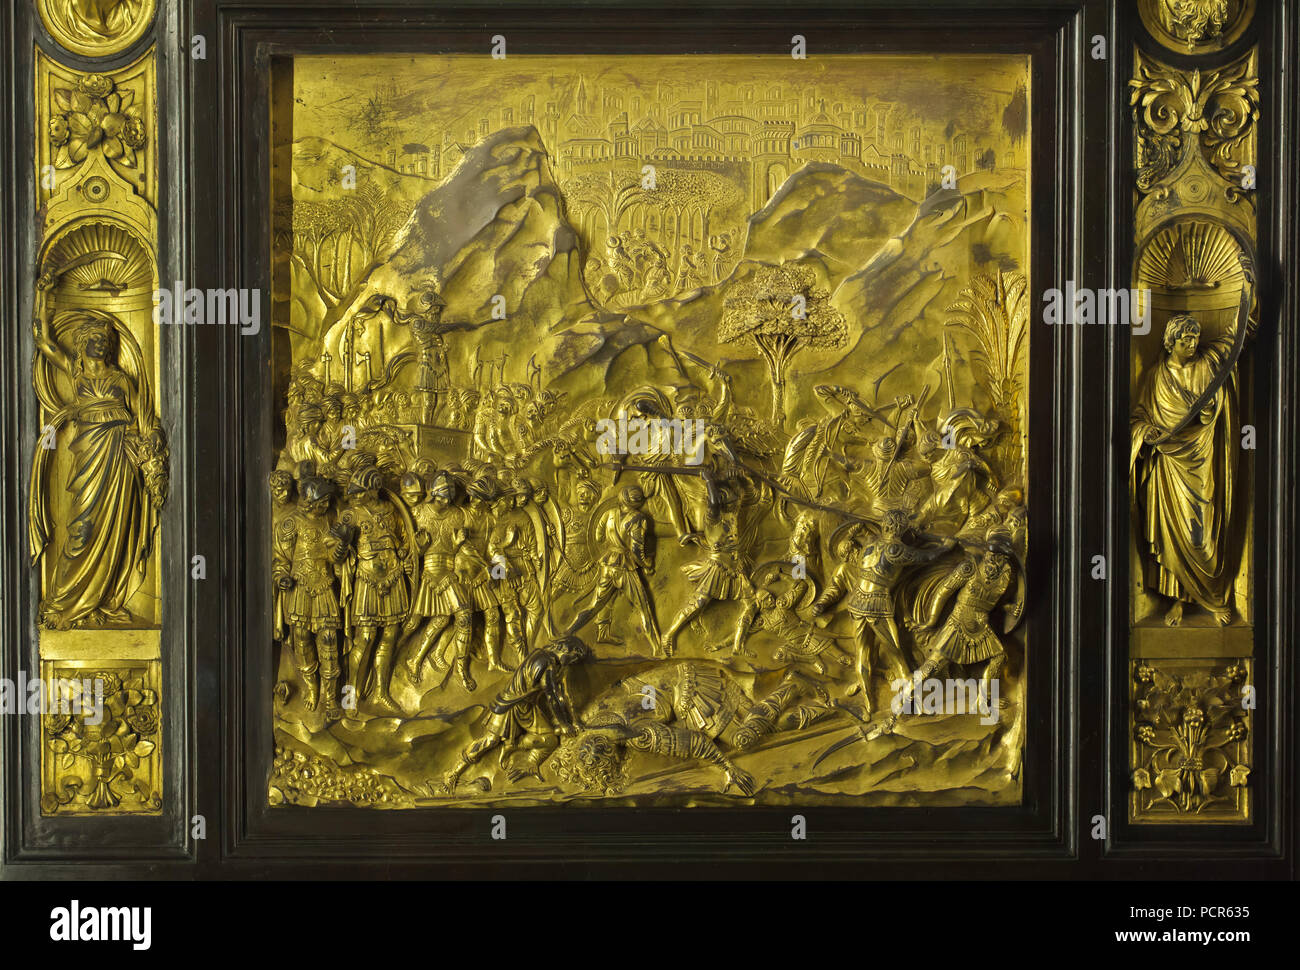 Story of David and Goliath depicted in the gilded bronze panel from the Gates of Paradise (Porta del Paradiso) designed by Italian Early Renaissance sculptor Lorenzo Ghiberti for the Florence Baptistery (Battistero di San Giovanni), now on display in the Museo dell'Opera del Duomo (Museum of the Works of the Florence Cathedral) in Florence, Tuscany, Italy. Stock Photo